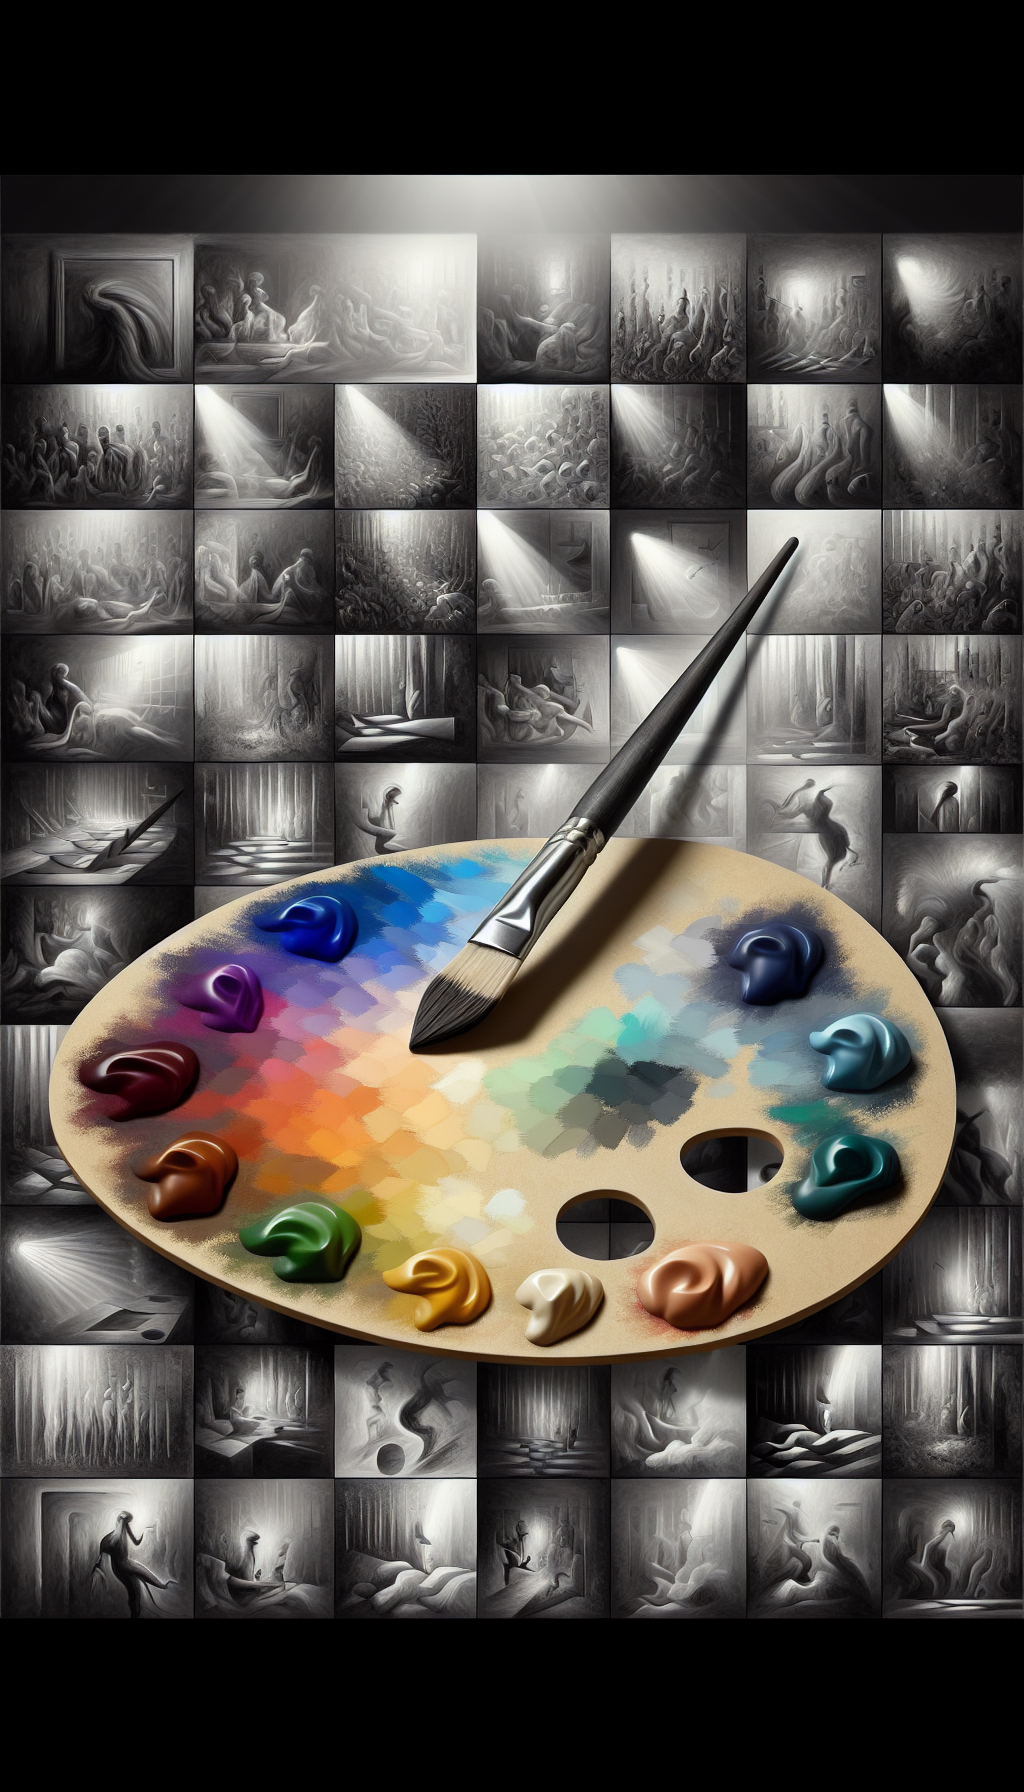 An illustration presents a painter's palette where each paint dollop transitions smoothly from light to dark, symbolizing a spectrum of tones. A brush hovers above, its tip showing a gradient blend. In the background, a monochrome artwork varies in shades, fragmented into various stylistic sections - from realism to abstract - each demonstrating the nuances of light and shadow application, epitomizing the mastery of artistic value.